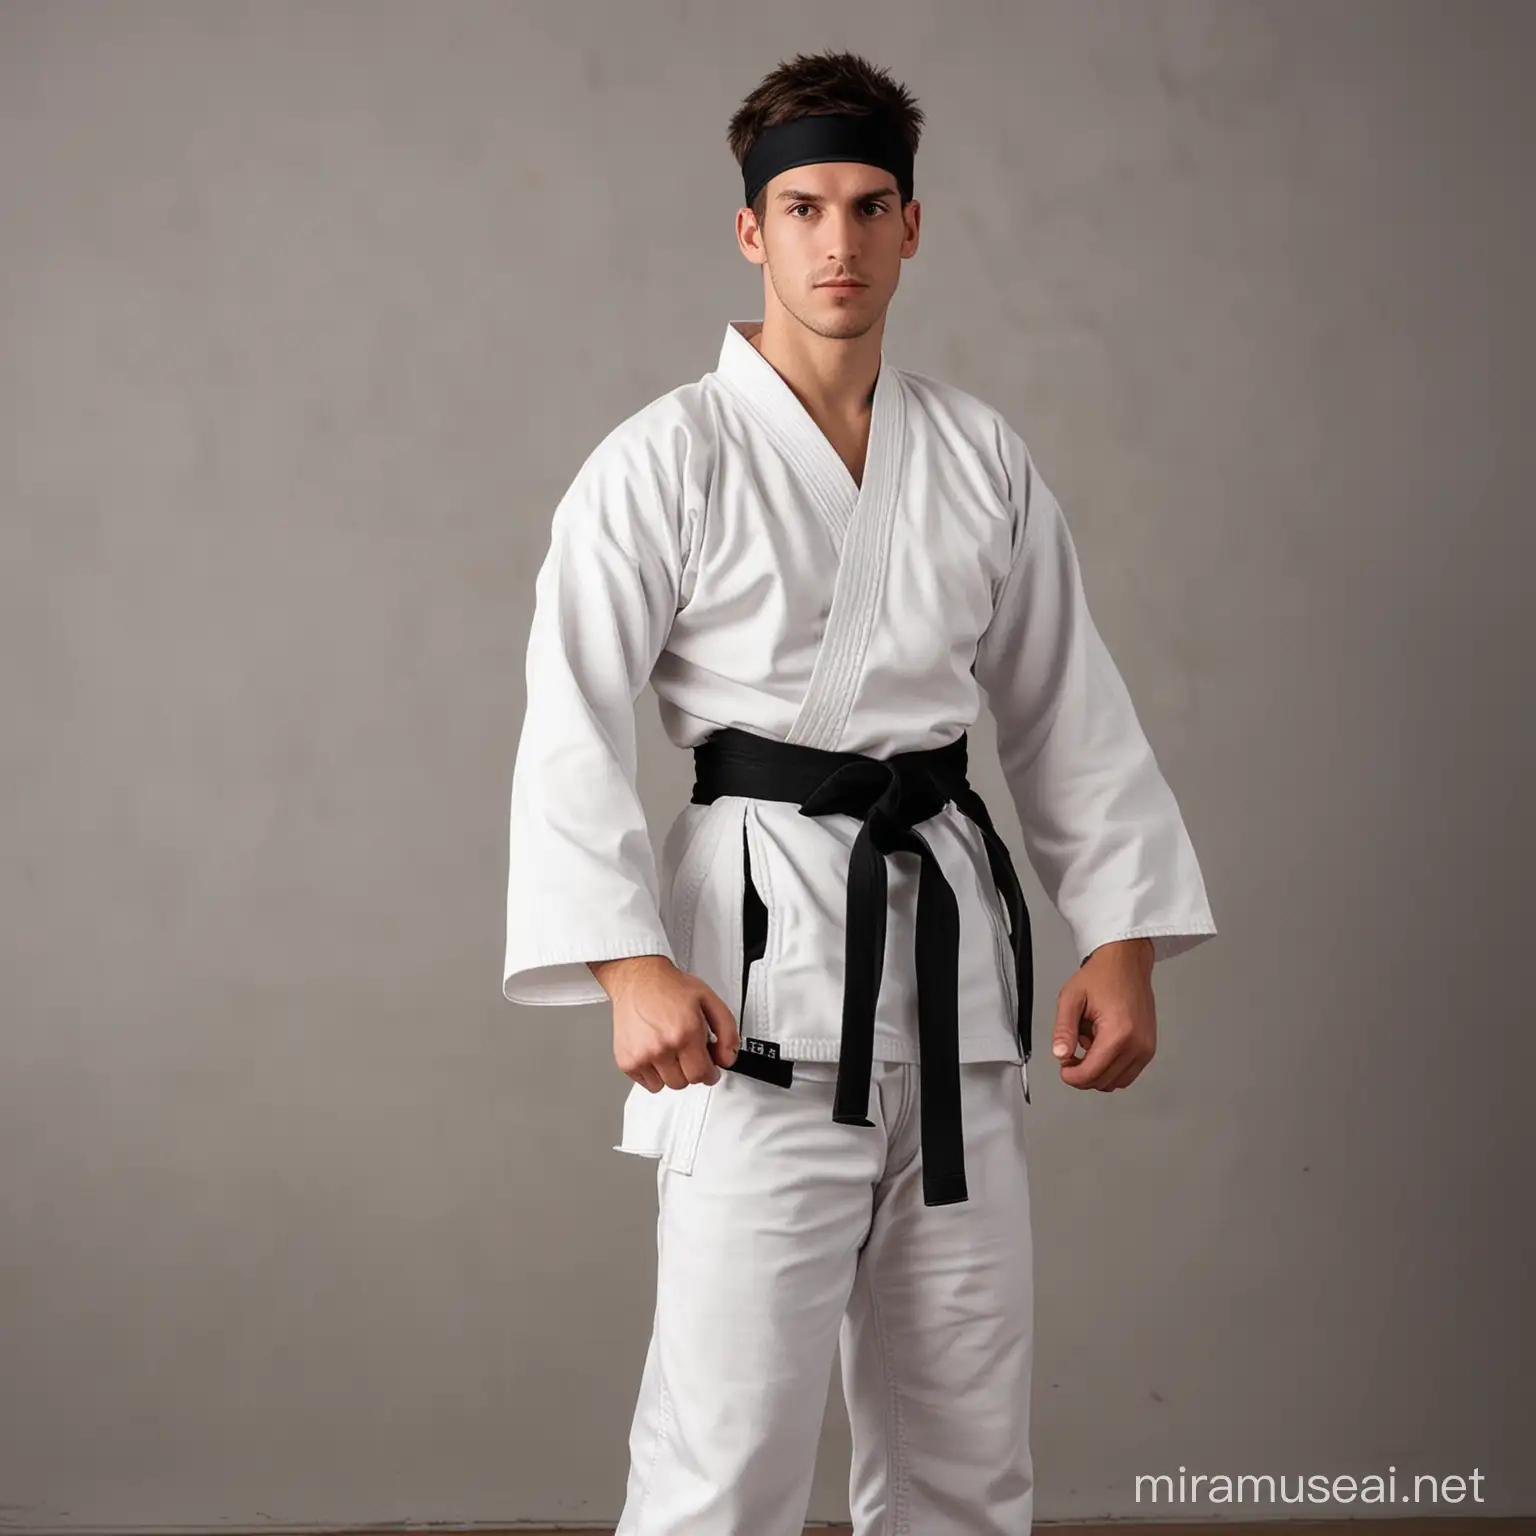 Male Karate Practitioner in Traditional Attire Training in Studio